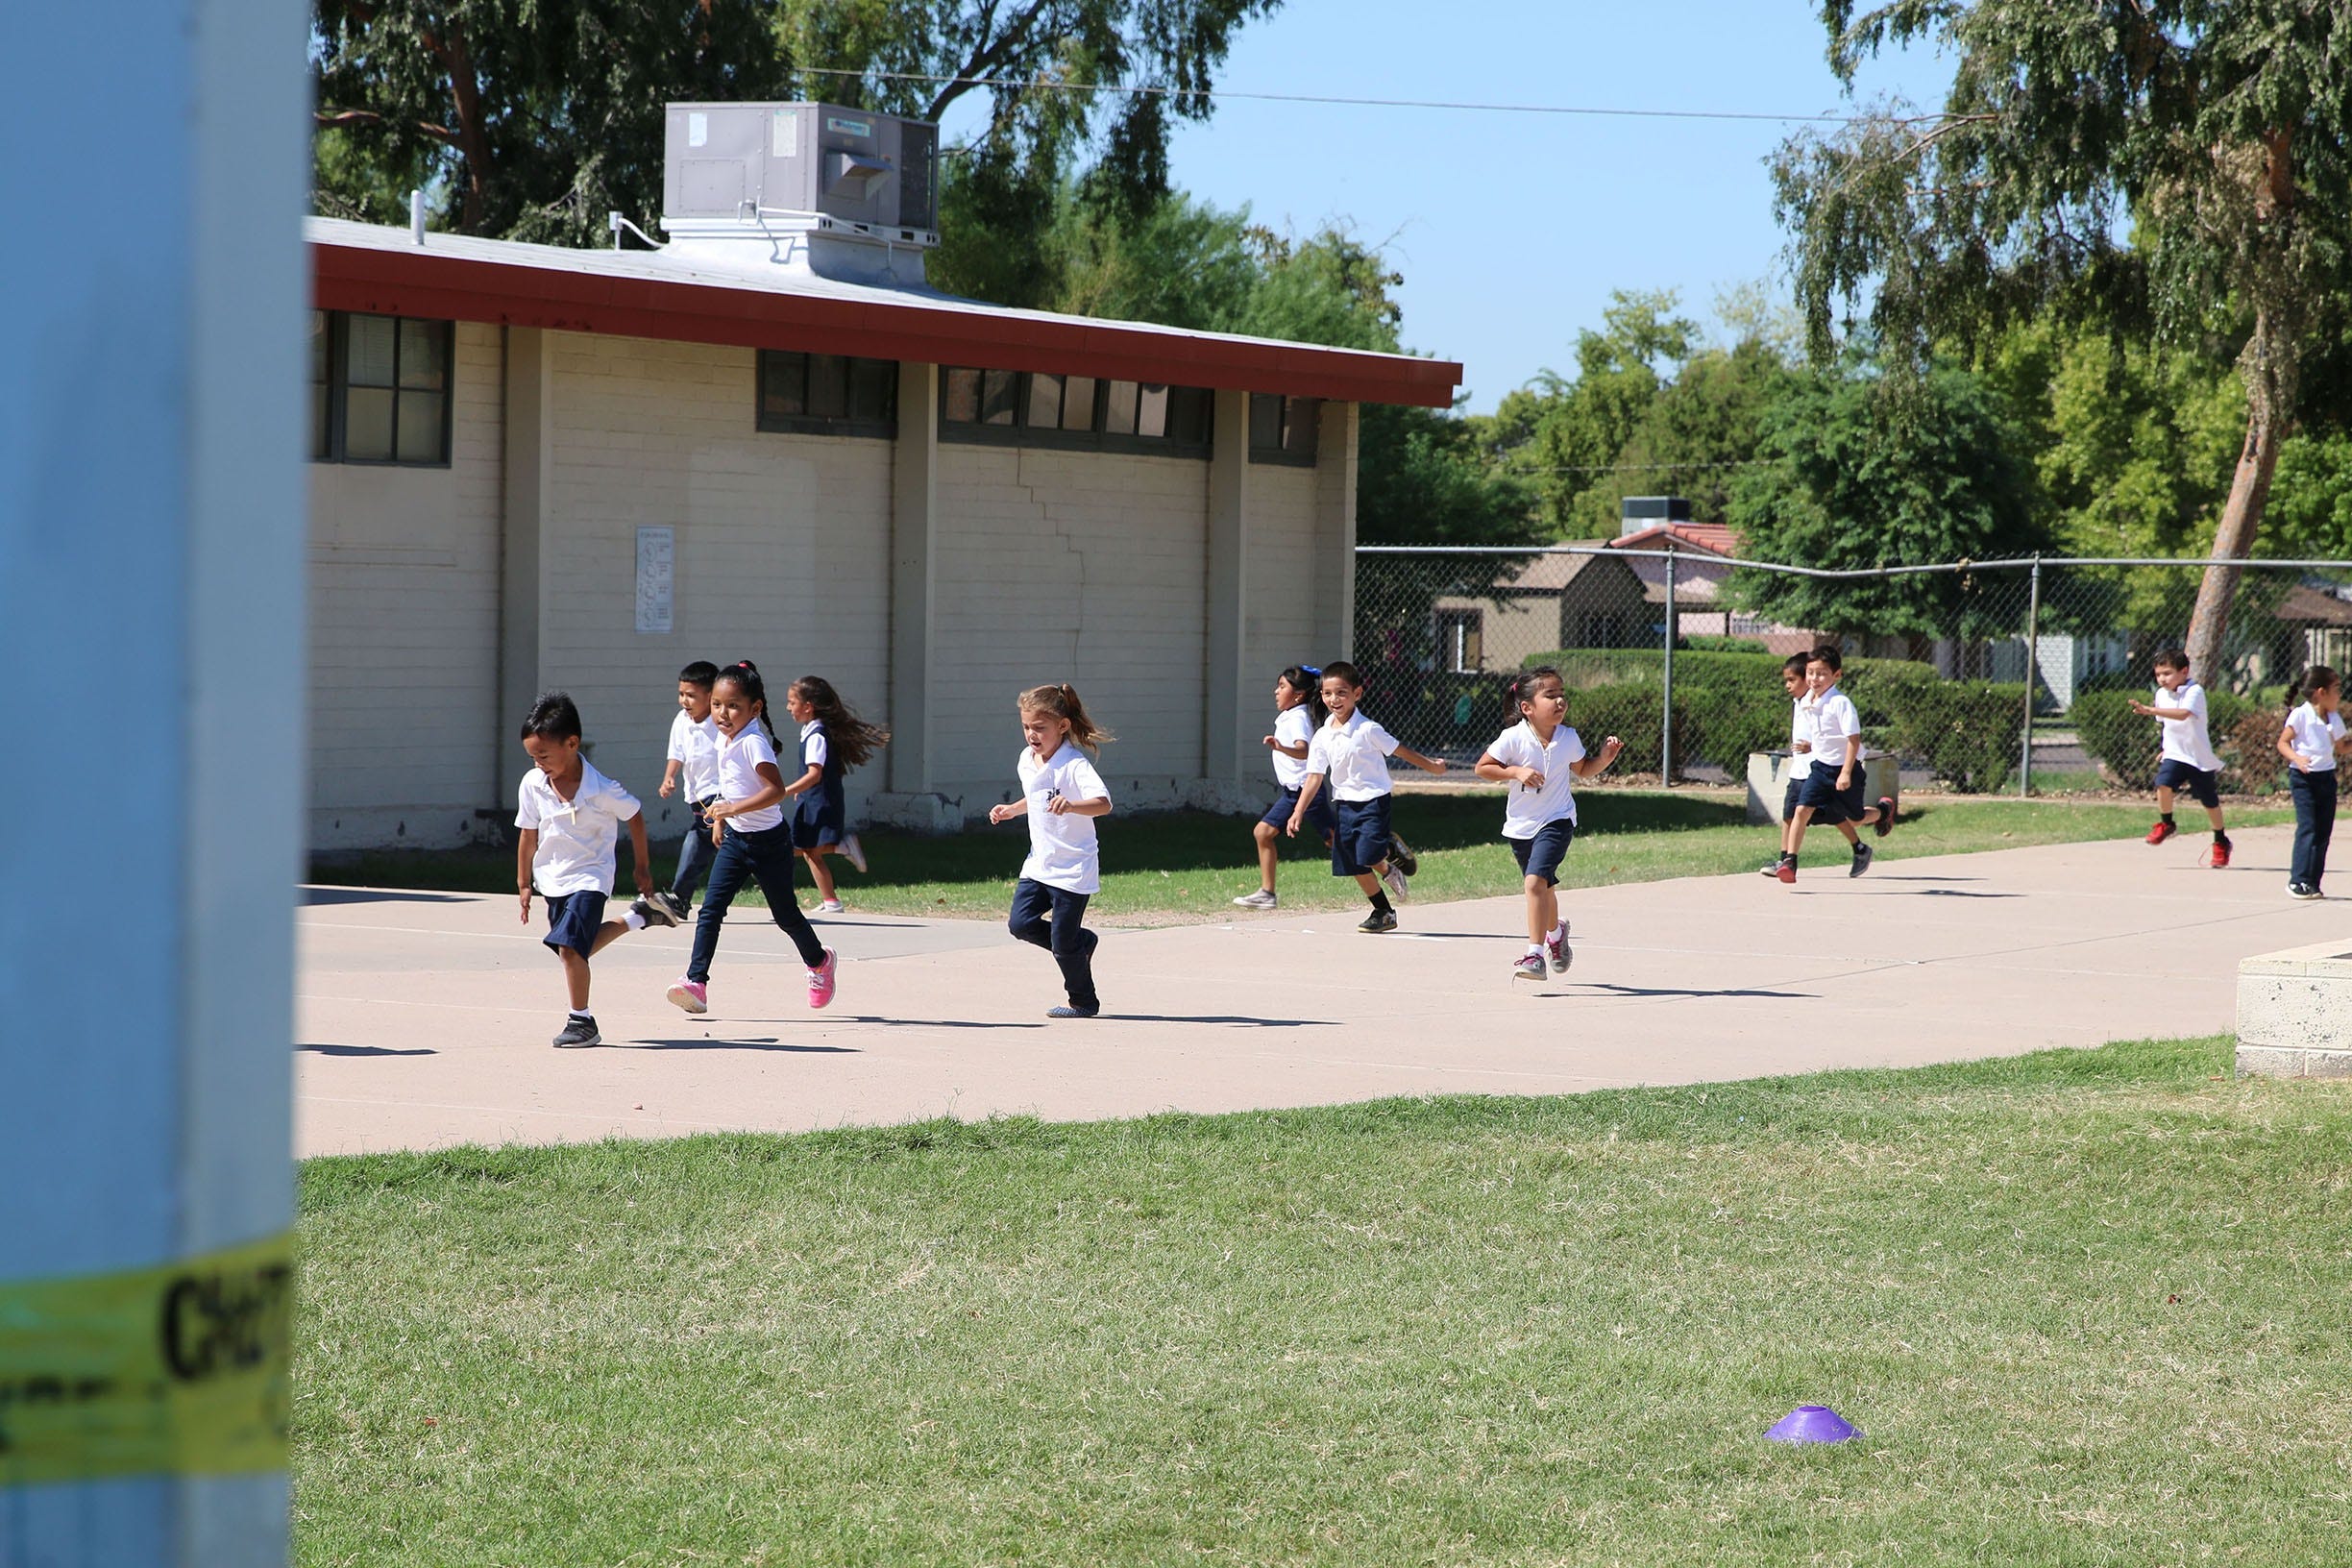 Teachers encouraged by early results of Arizona law requiring more recess